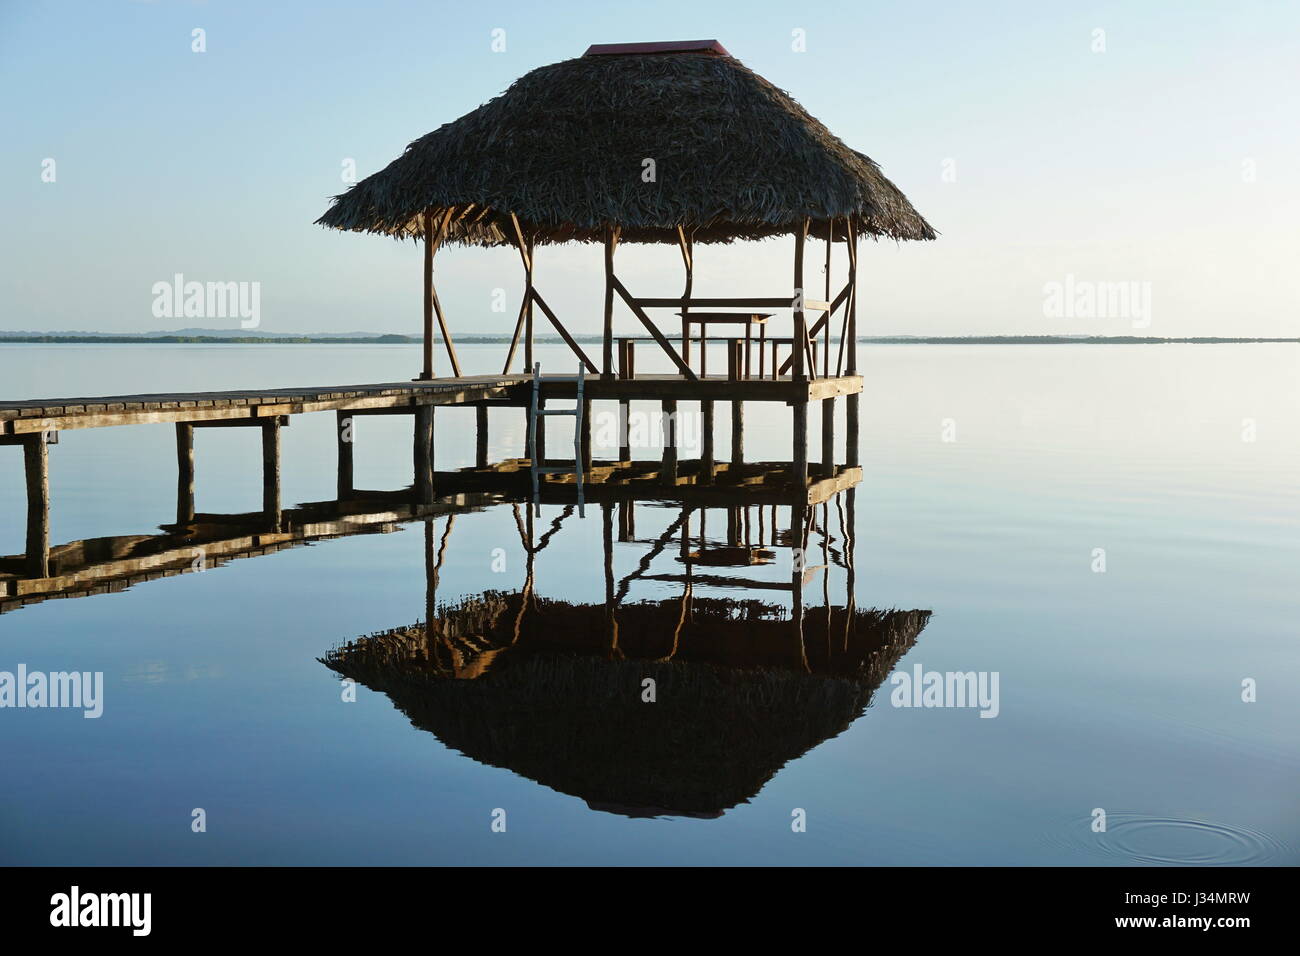 Thatched hut overwater and its reflection on a calm water surface, sunrise light, natural scene, Caribbean sea, Panama, Central America Stock Photo